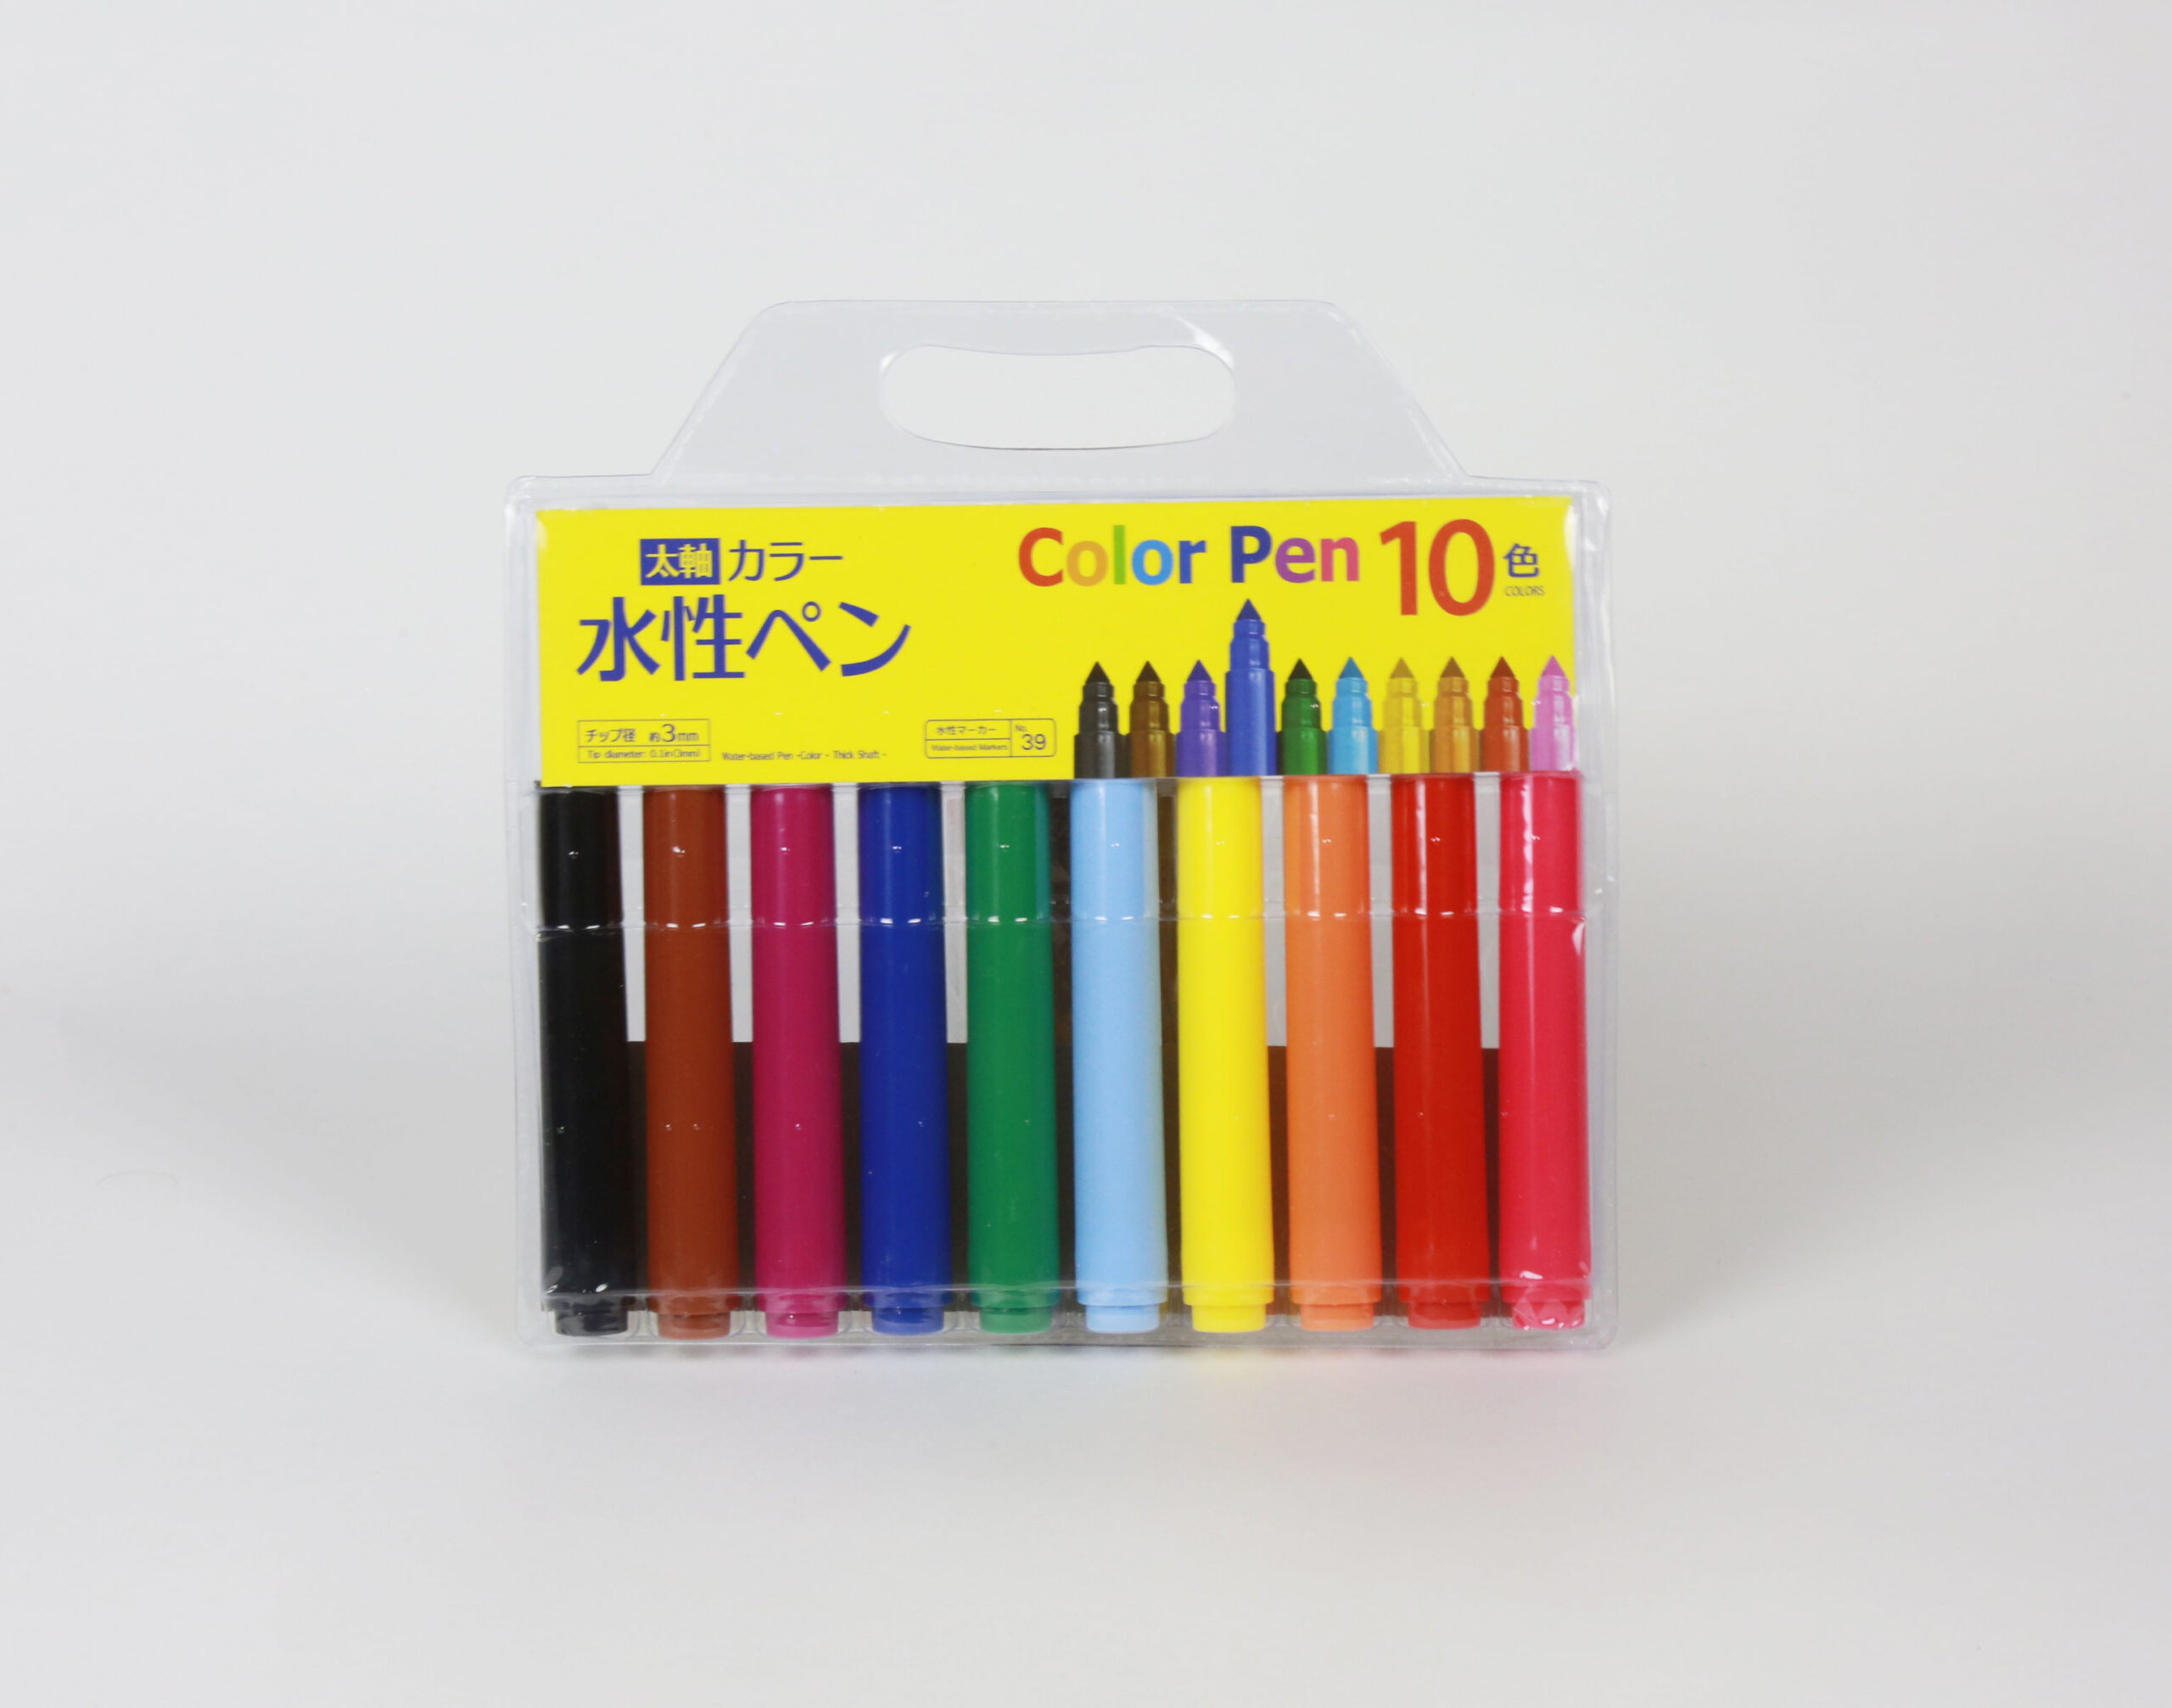 https://daisome.com/wp-content/uploads/2021/08/Stationery-10-color-pens-scaled.jpg